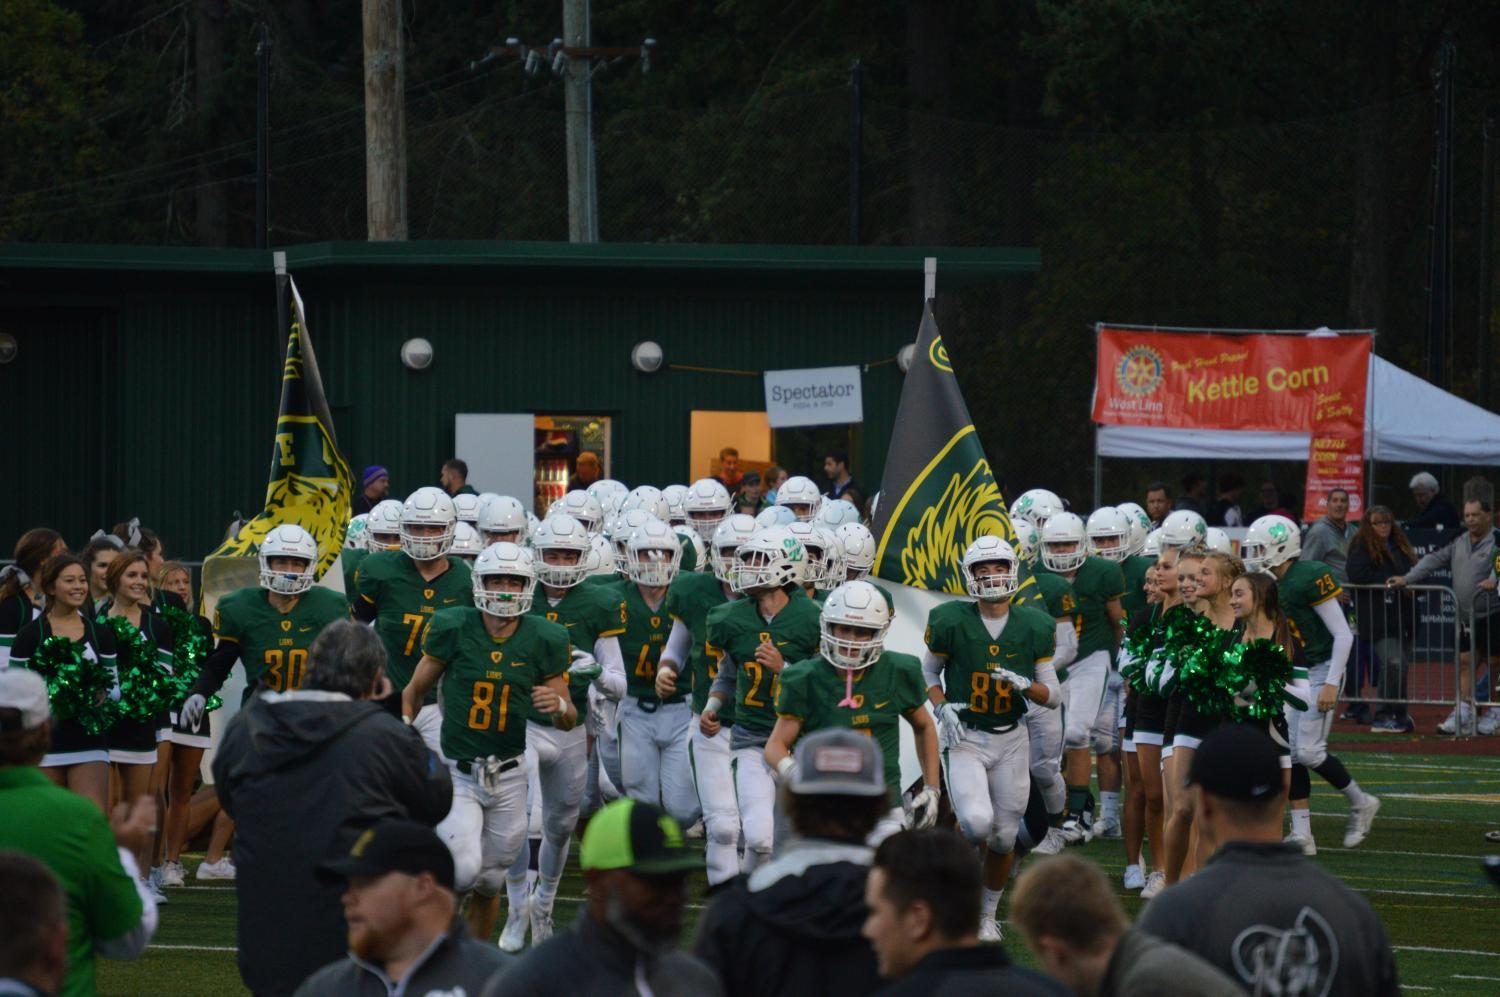 Before their blowout win against Tualatin, the team takes the field after their walk through the student section. Following the dominant victory, West Linn moves to 4-0 on the season (2-0 Three Rivers League) and Tualatin falls to 1-3 (1-1 Three Rivers League).